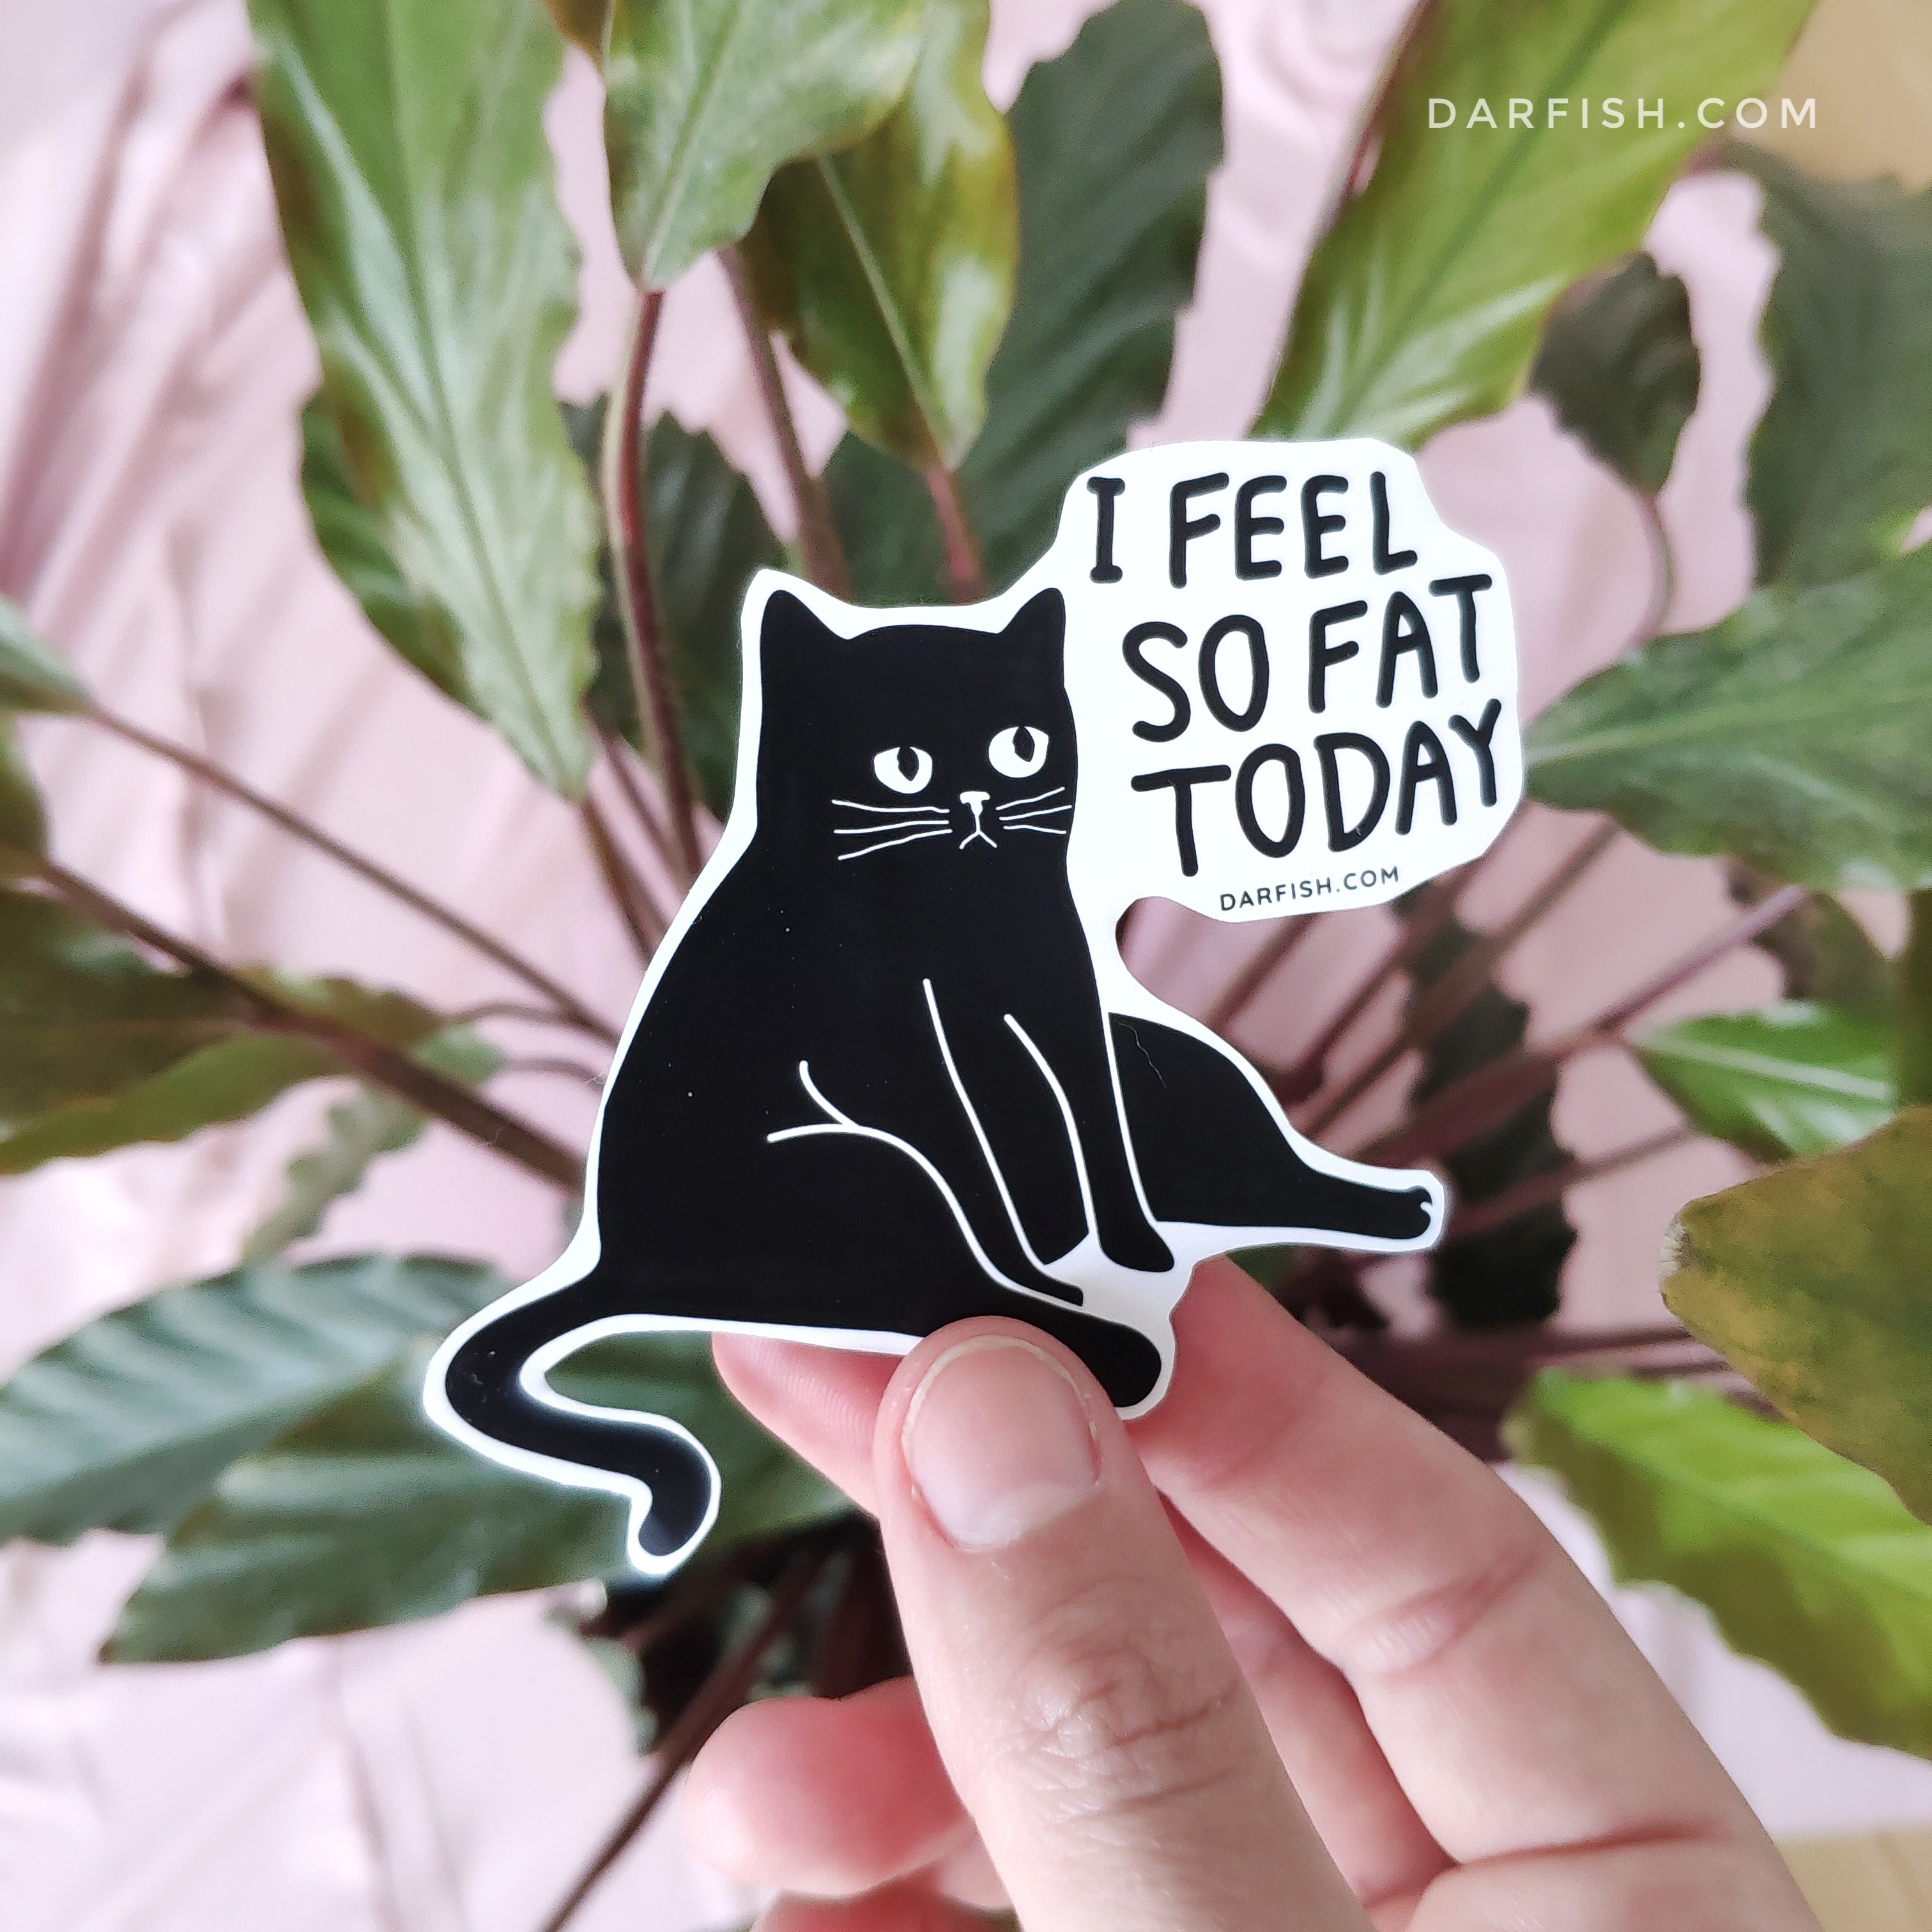 how do you feel today cat scale sticker – DARFISH